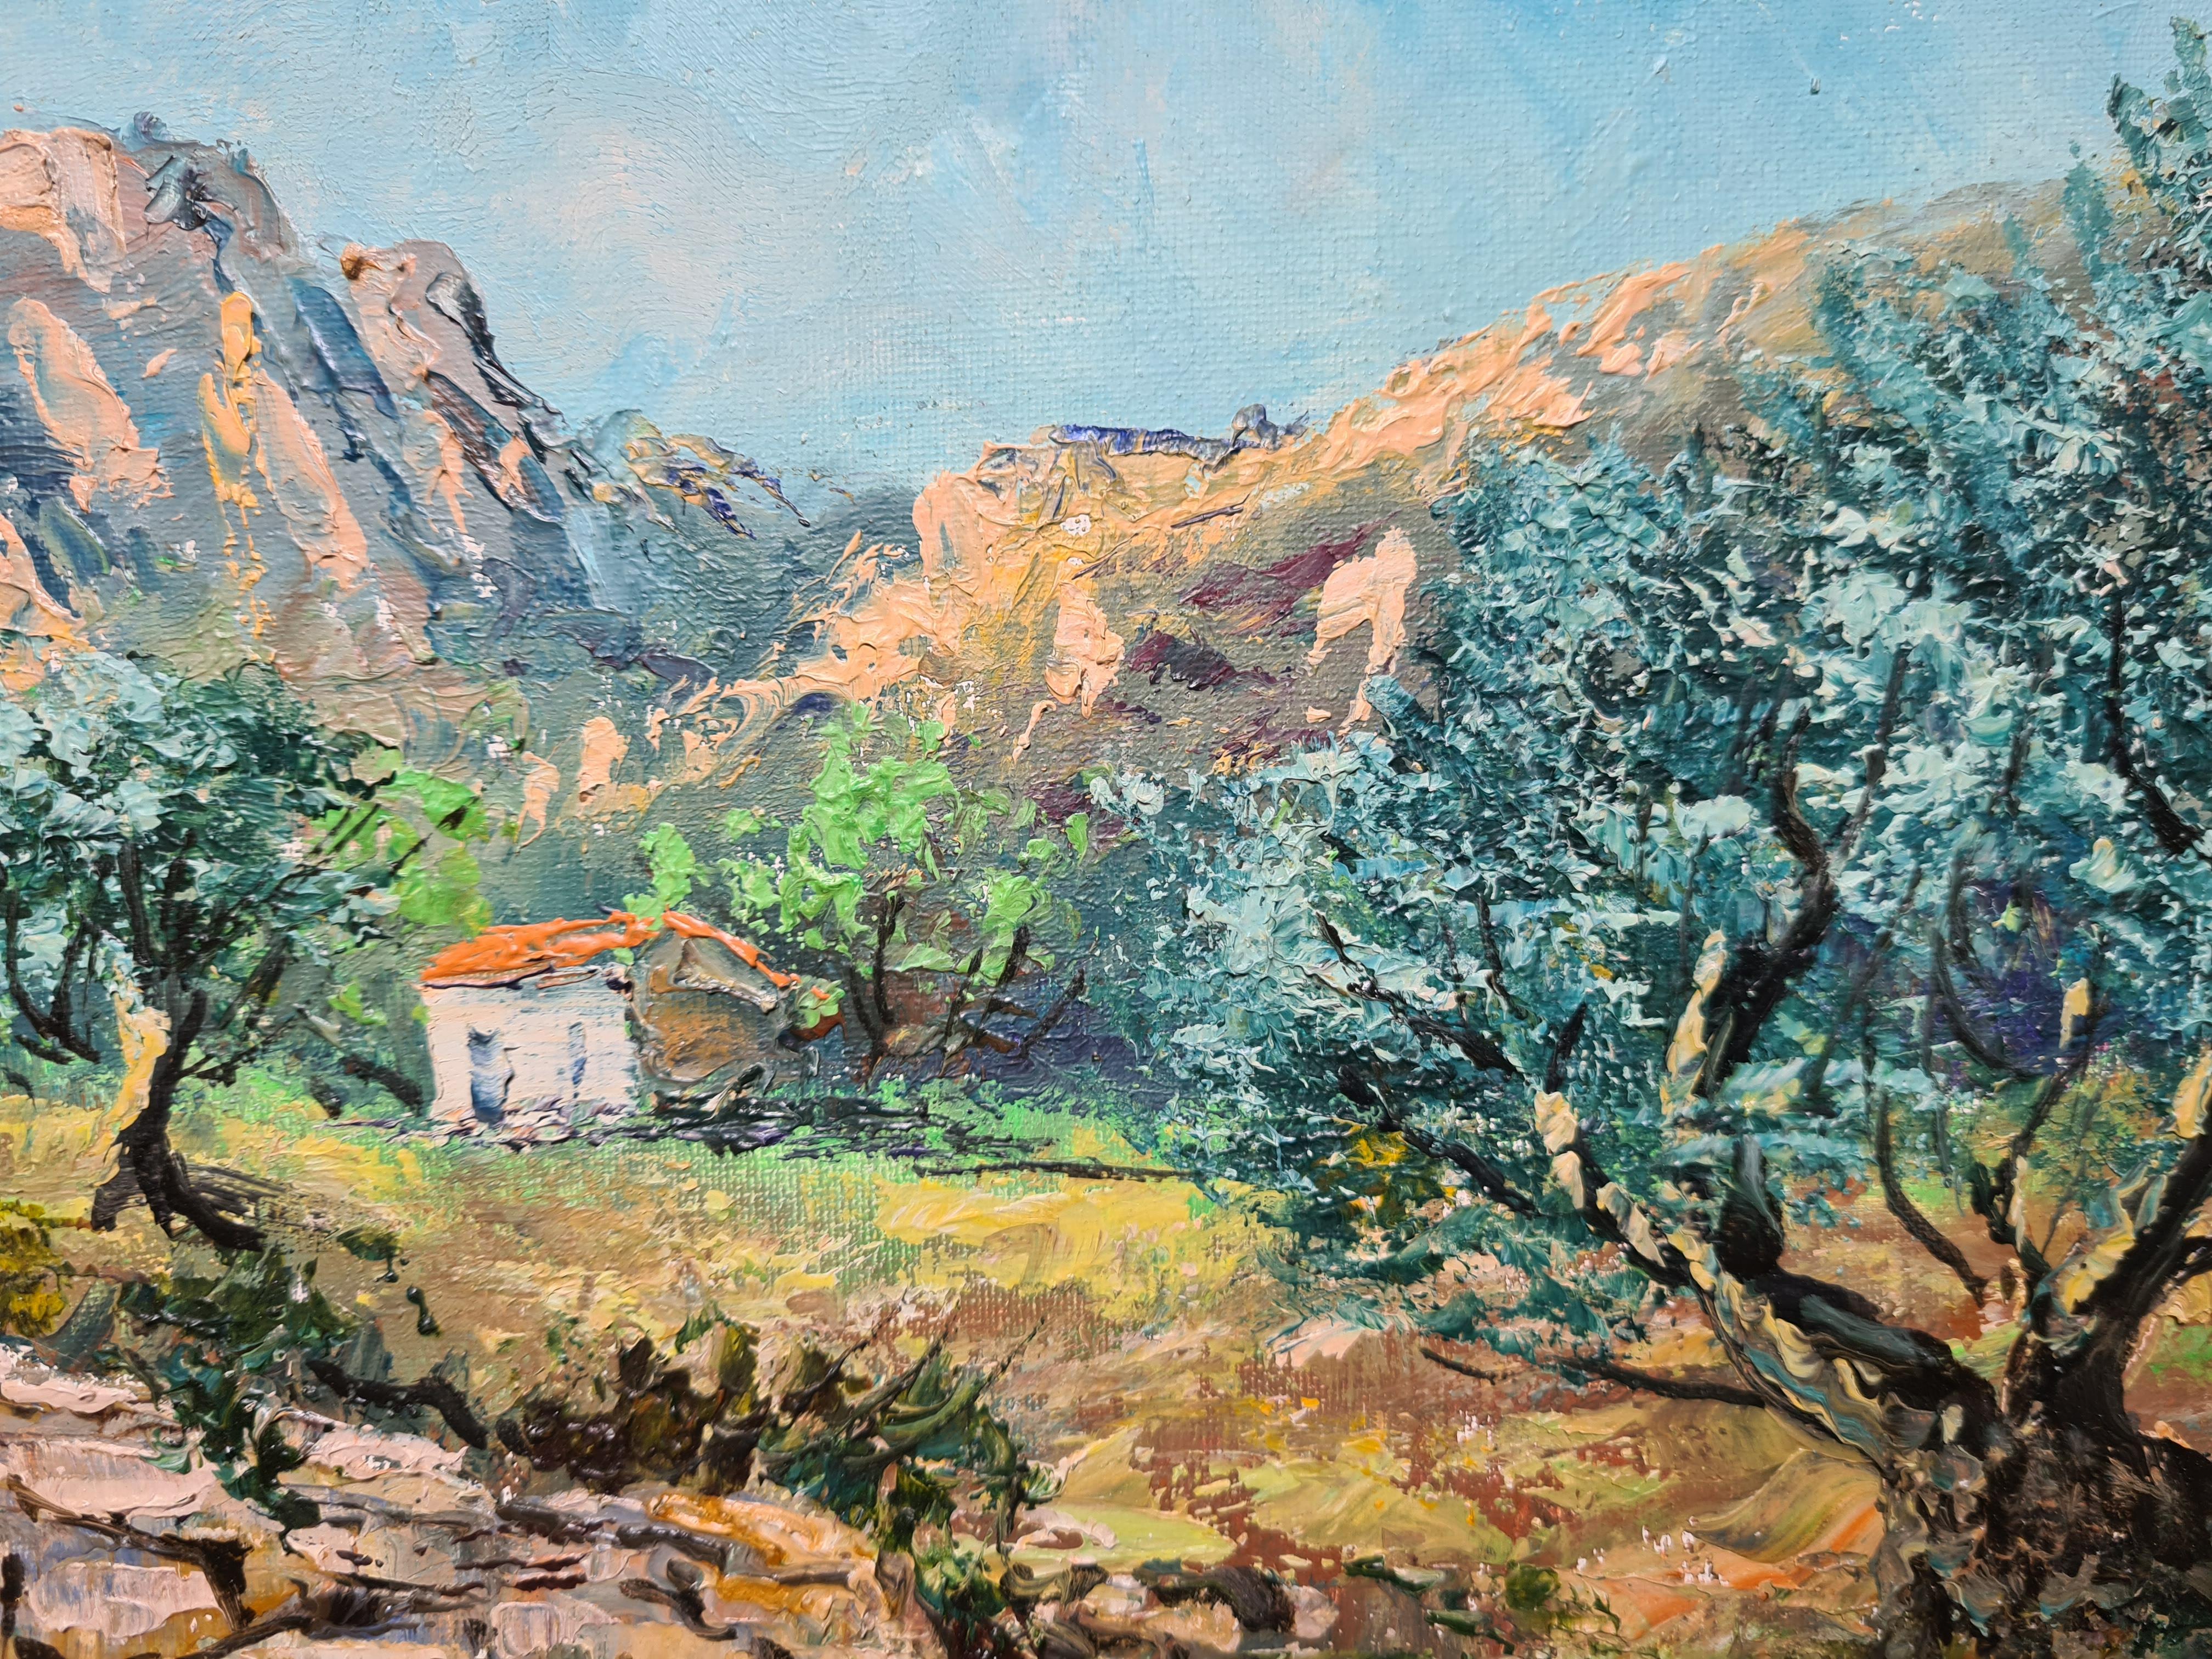 Le Cabanon Provençal et son Oliveraie, French Country Cottage in an Olive Grove - Impressionist Painting by Maurice Schwab aka 'Grawil'